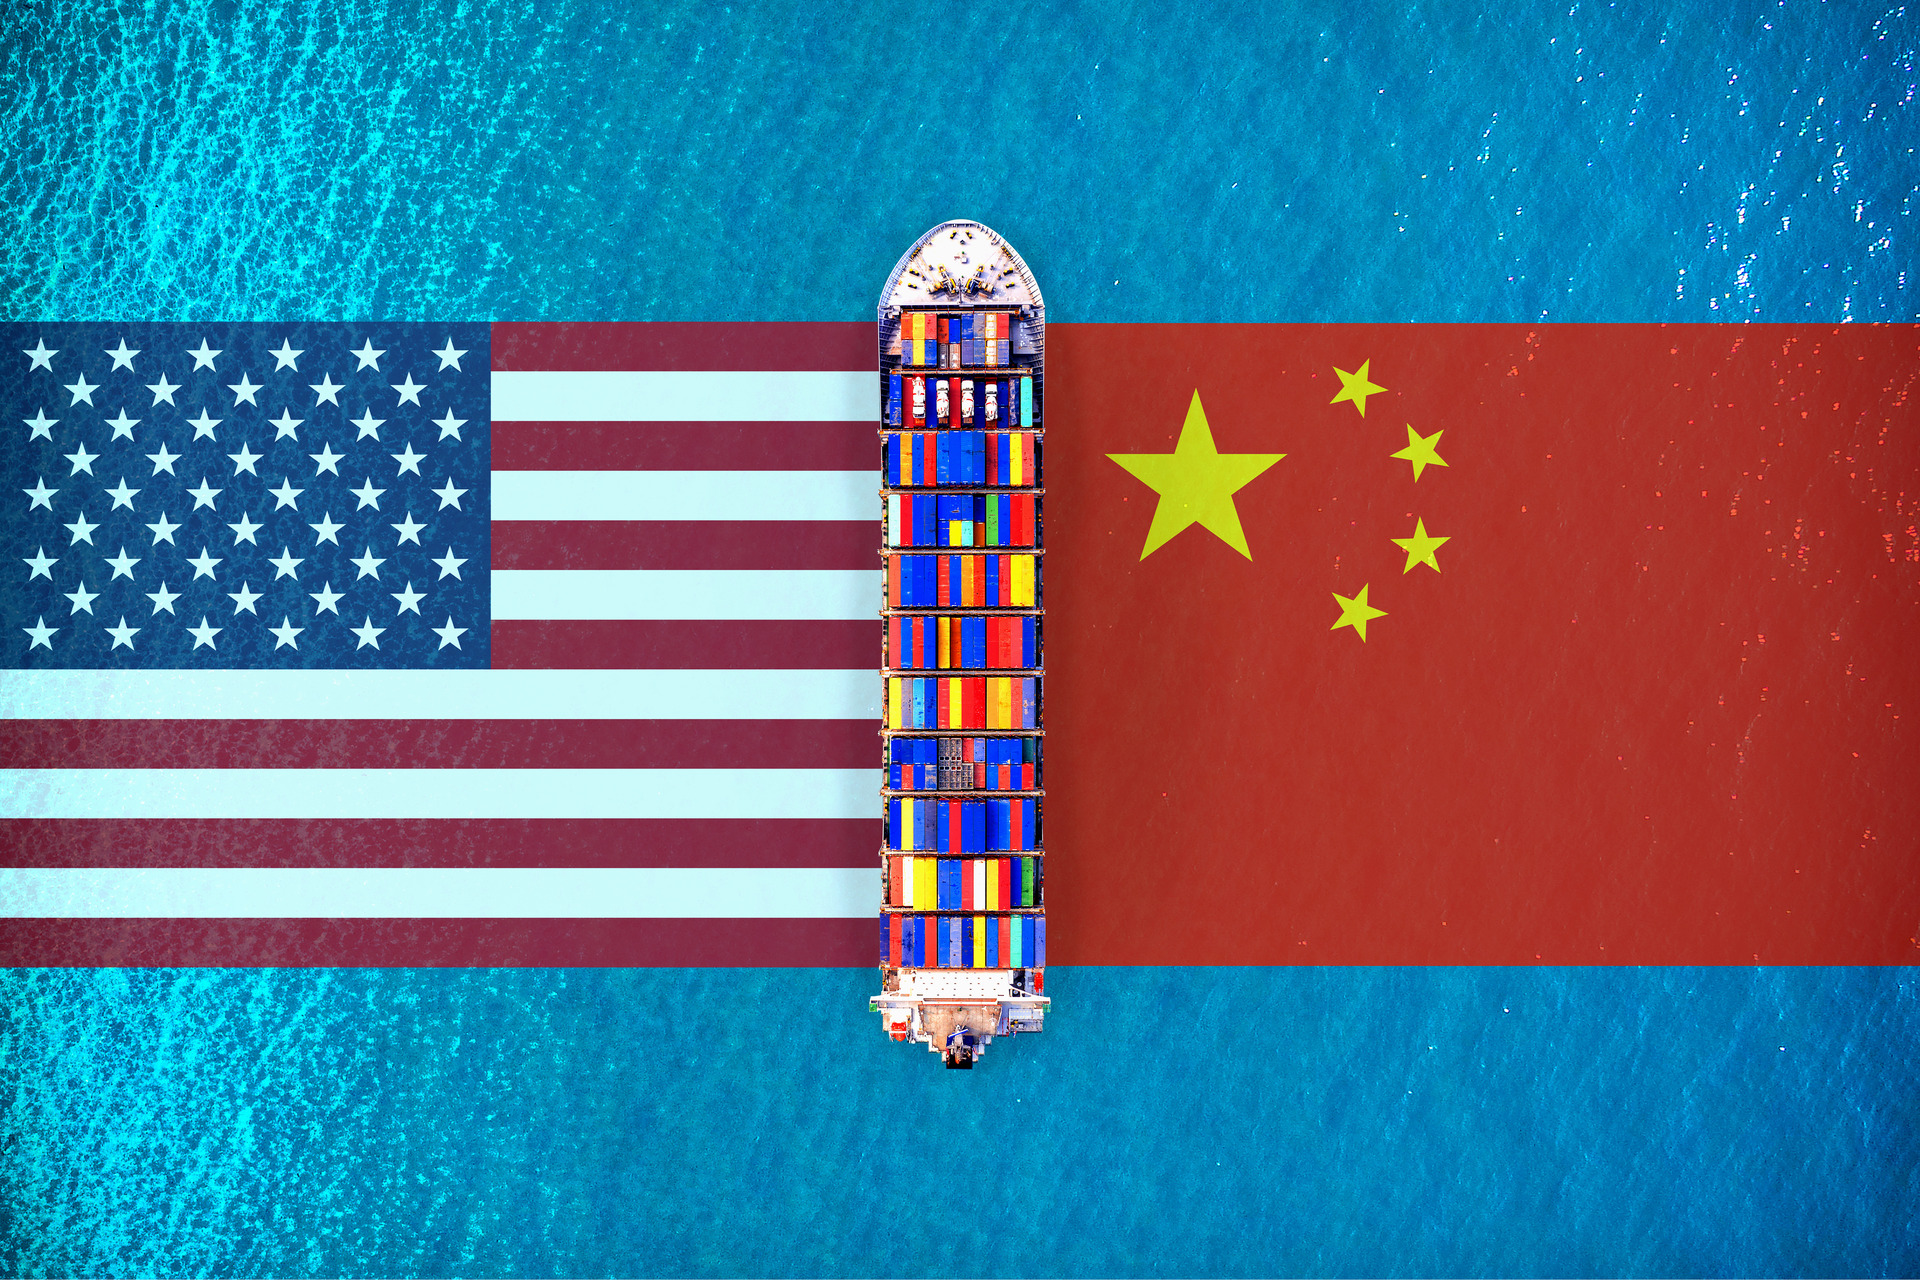 America flags and chinese flags with Cargo ship on ocean. USA and China trade war.